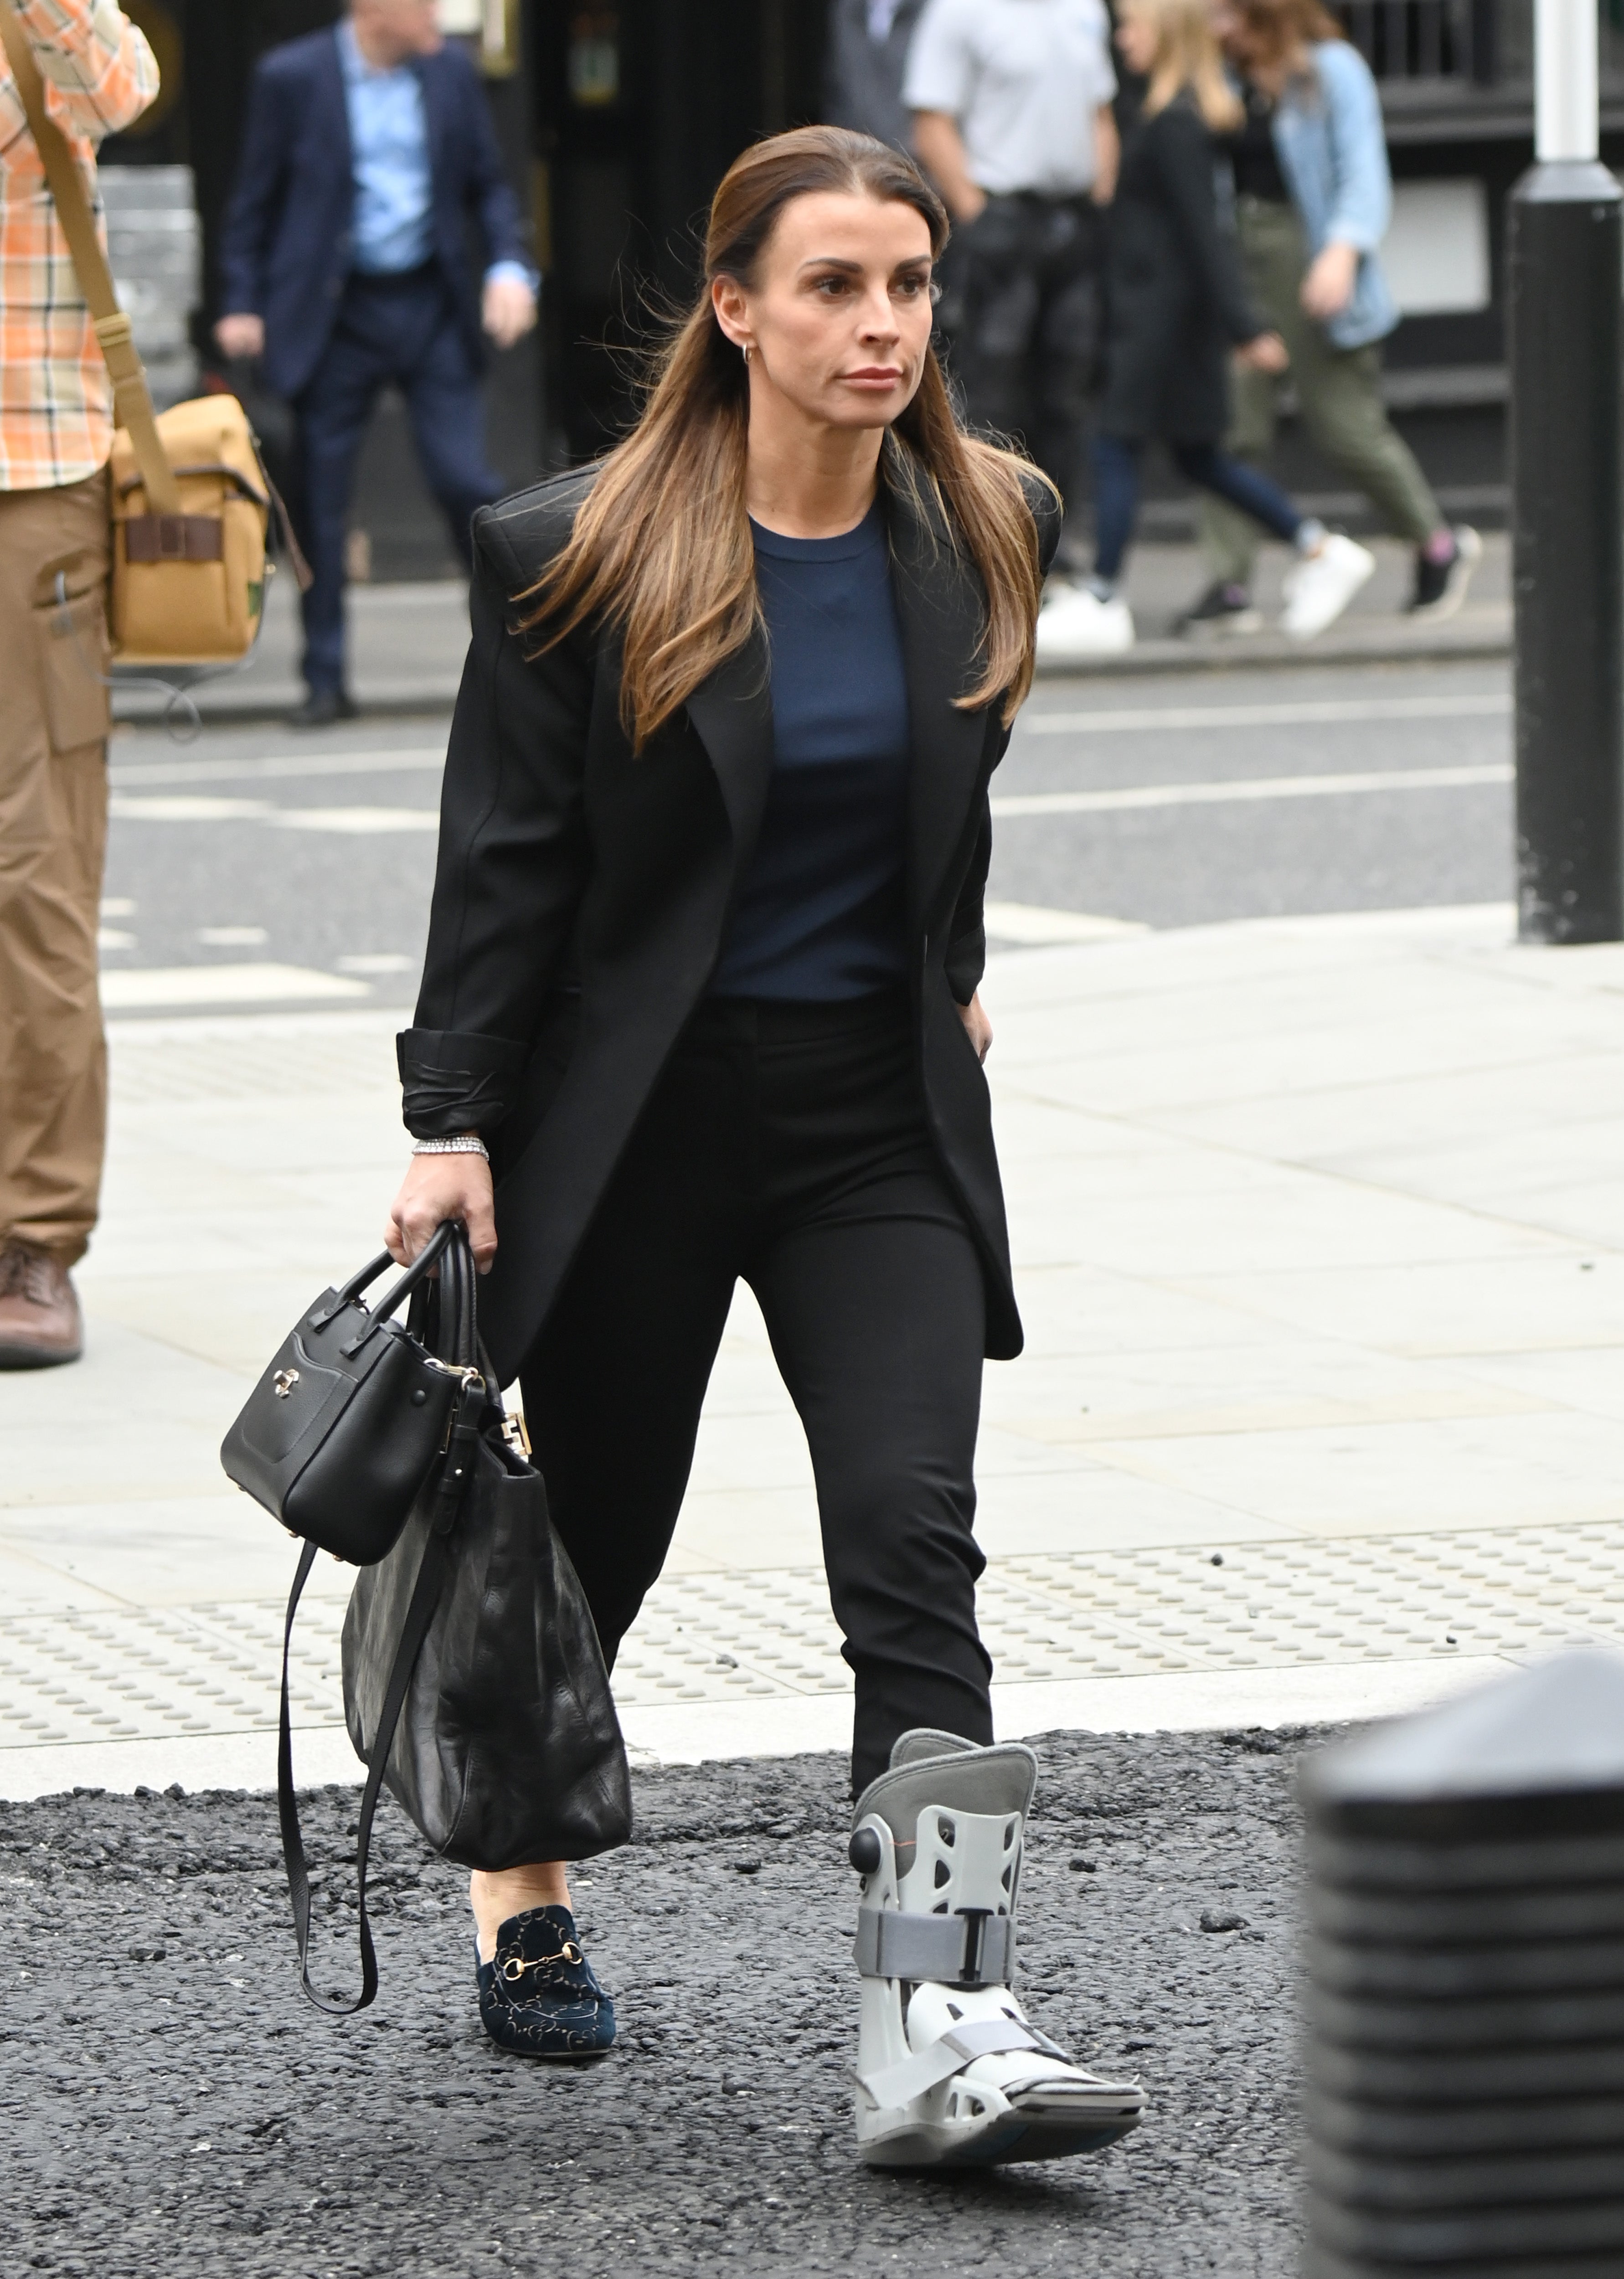 Coleen Rooney was accompanied by her footballer husband Wayne Rooney for the first day of Rebekah Vardy’s High Court libel trial